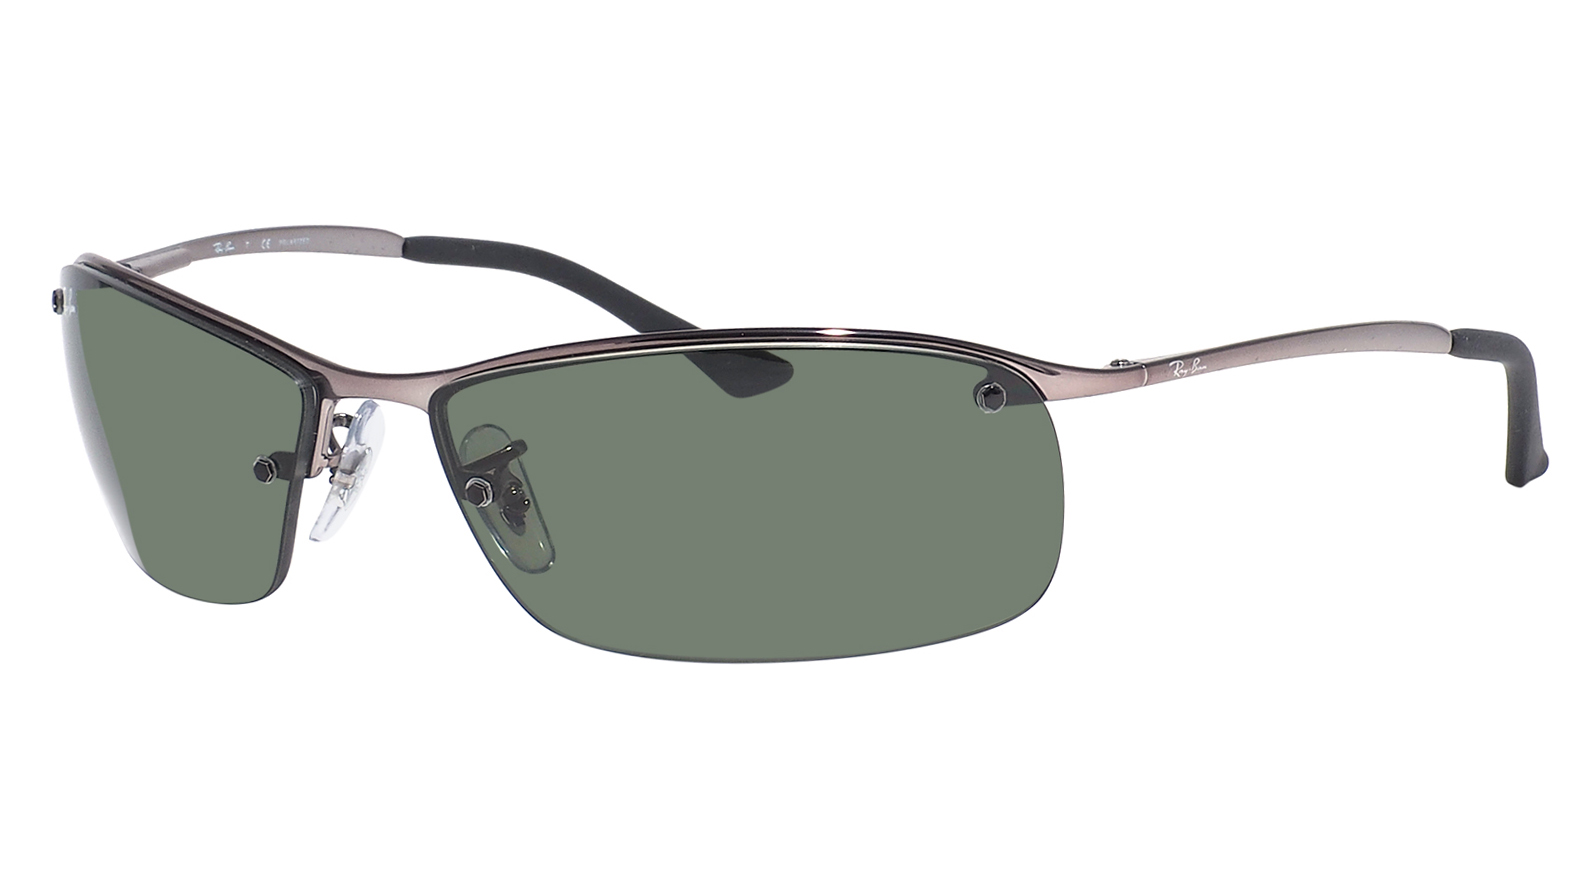 Ray-Ban Active Lifestyle RB 3183 004/9A ray ban active lifestyle rx 7047 5451